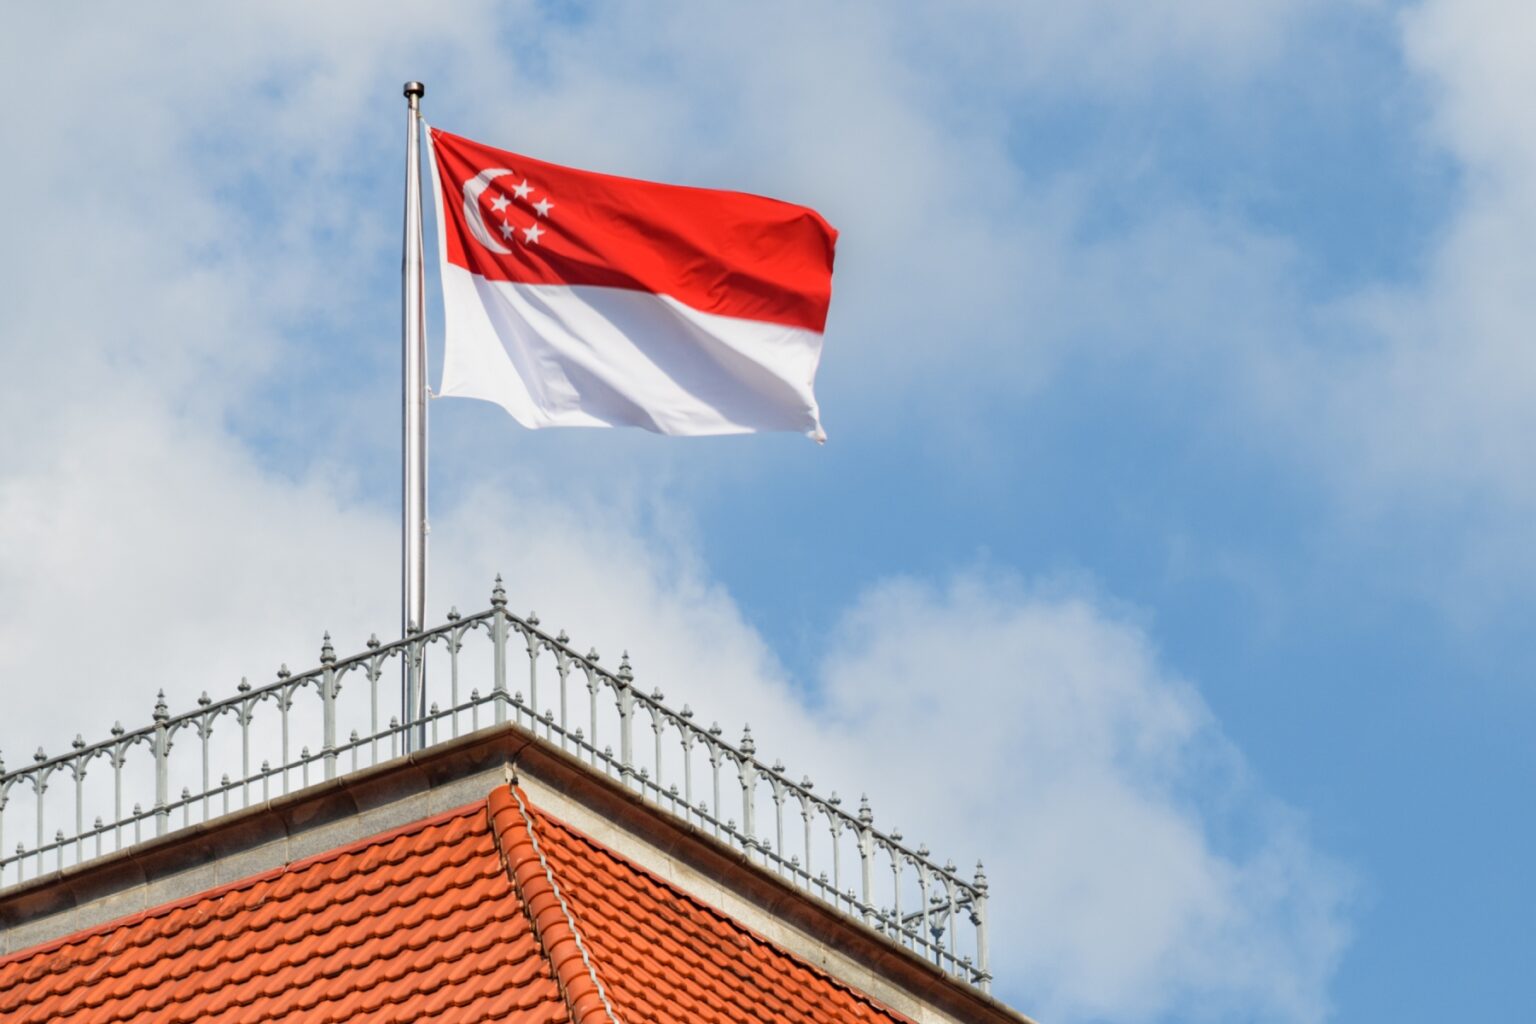 A Singapore flag in top of a building